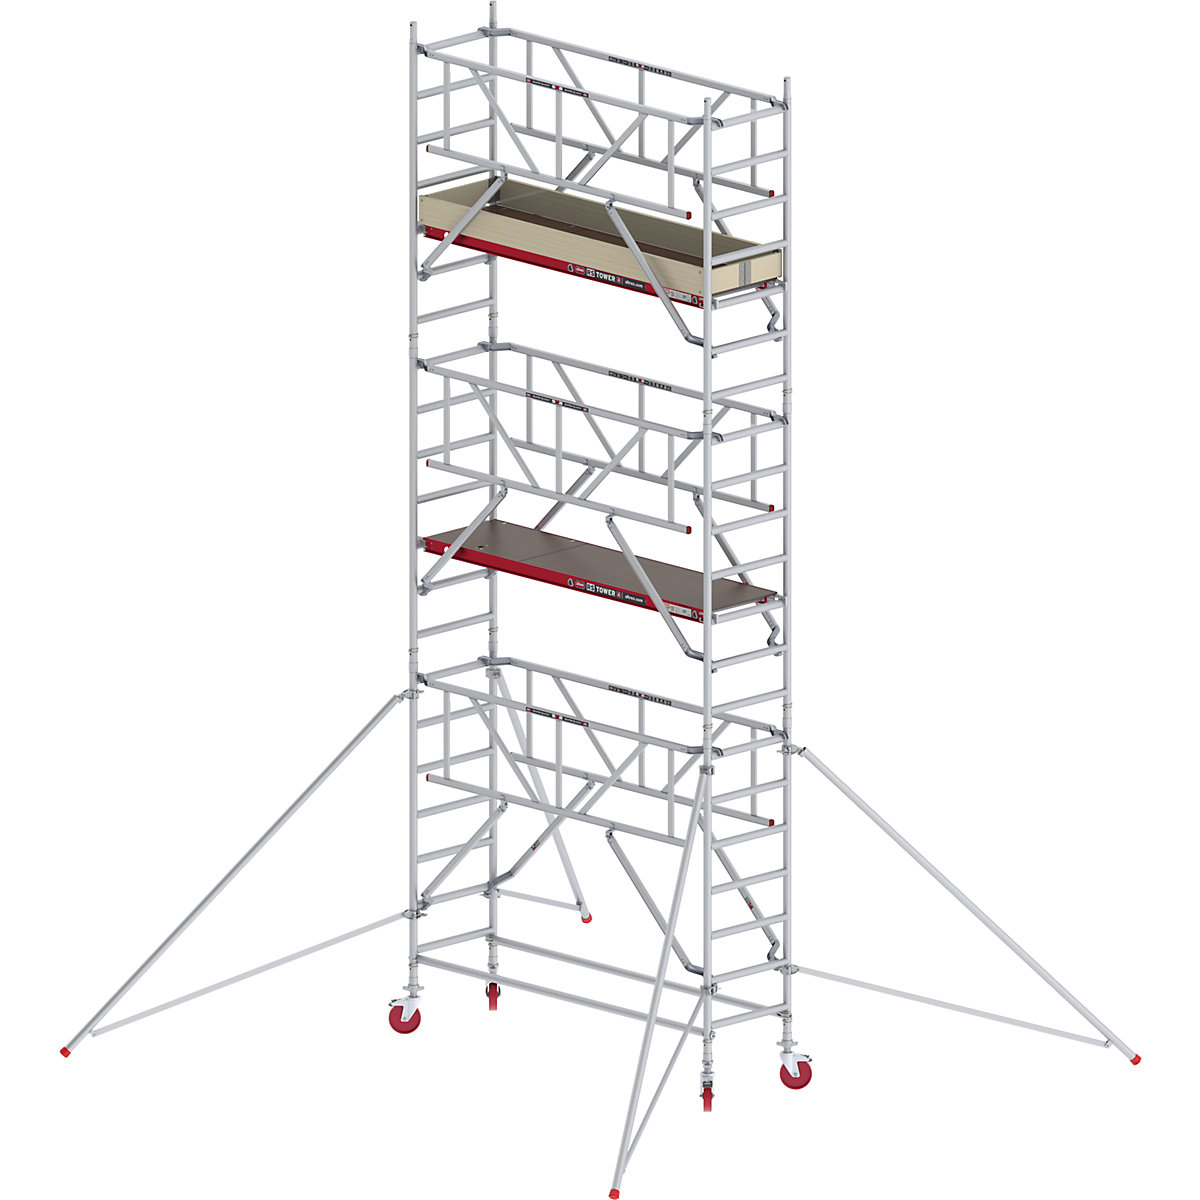 RS TOWER 41 slim mobile access tower with Safe-Quick® – Altrex, wooden platform, length 1.85 m, working height 7.20 m-4